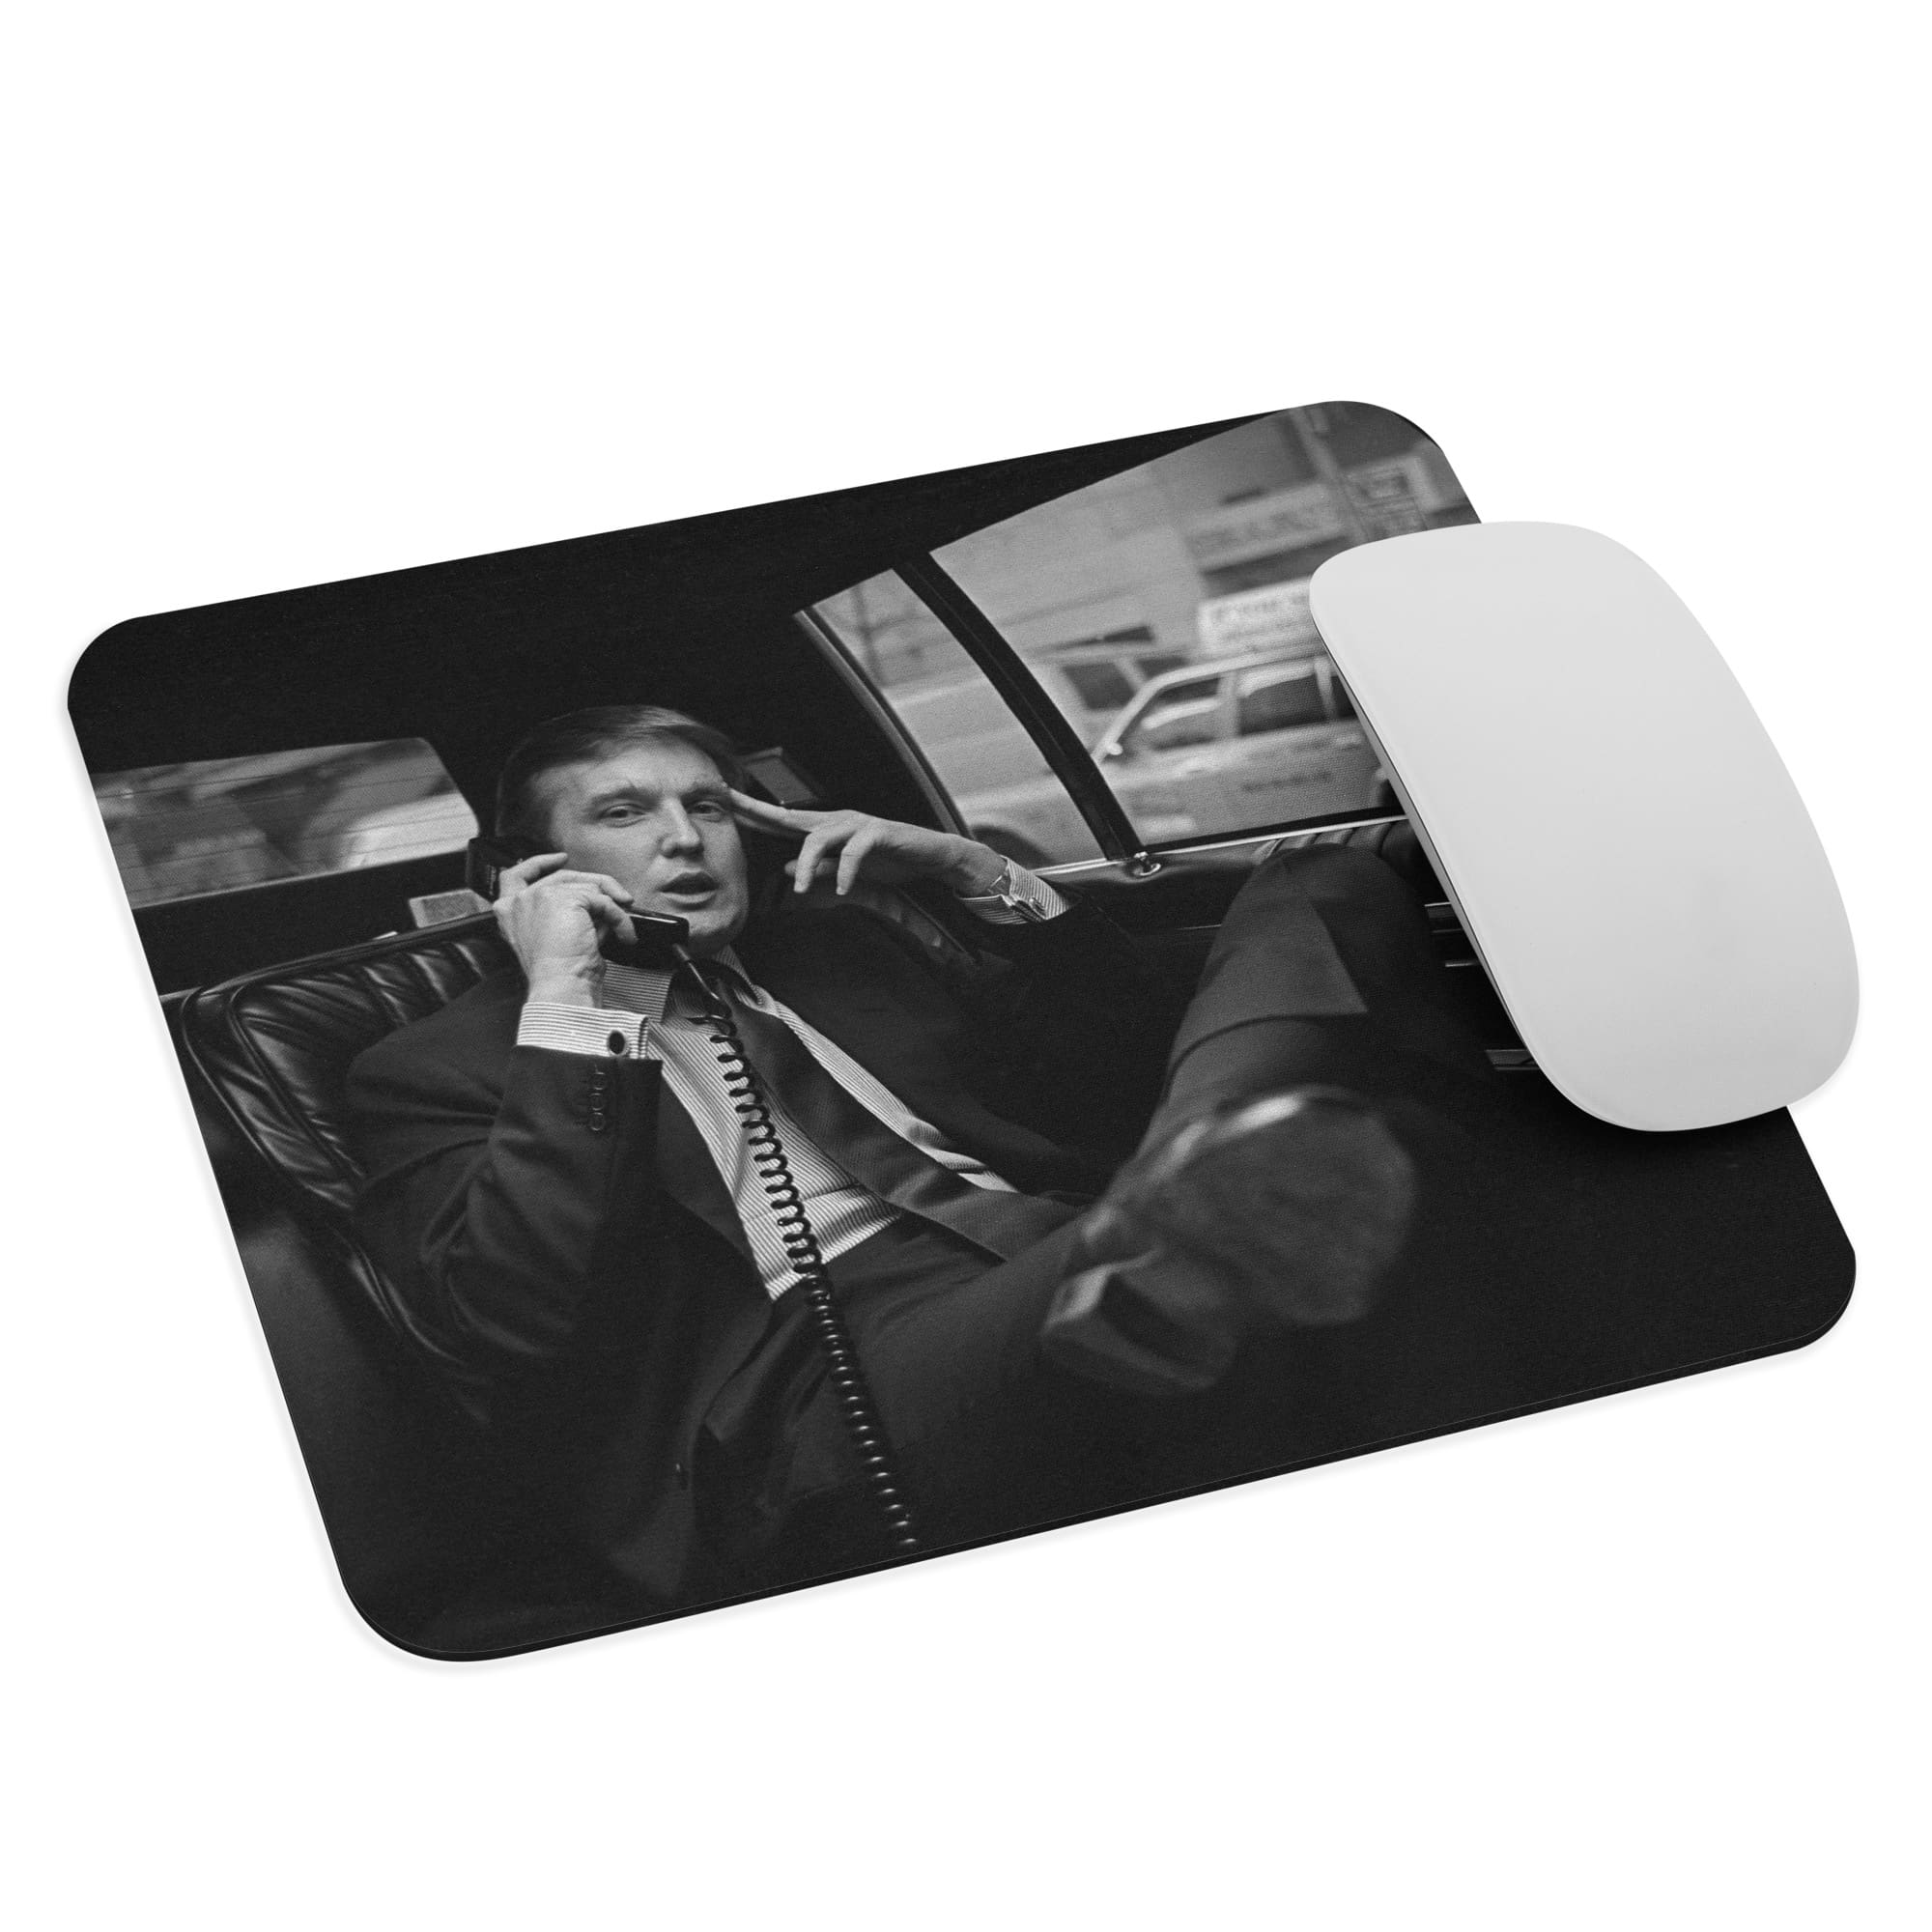 Trump Classic Limo Phone Call Mouse pad by Trump is Punk Rock